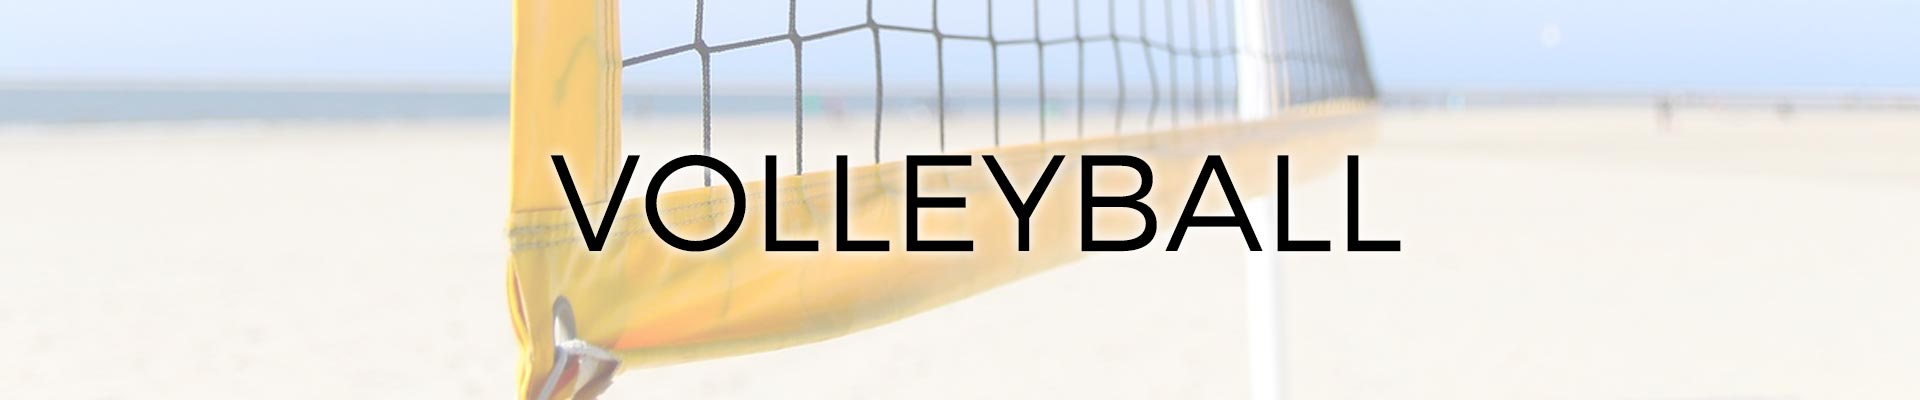 Girls Volleyball Jewelry and Gifts Collection